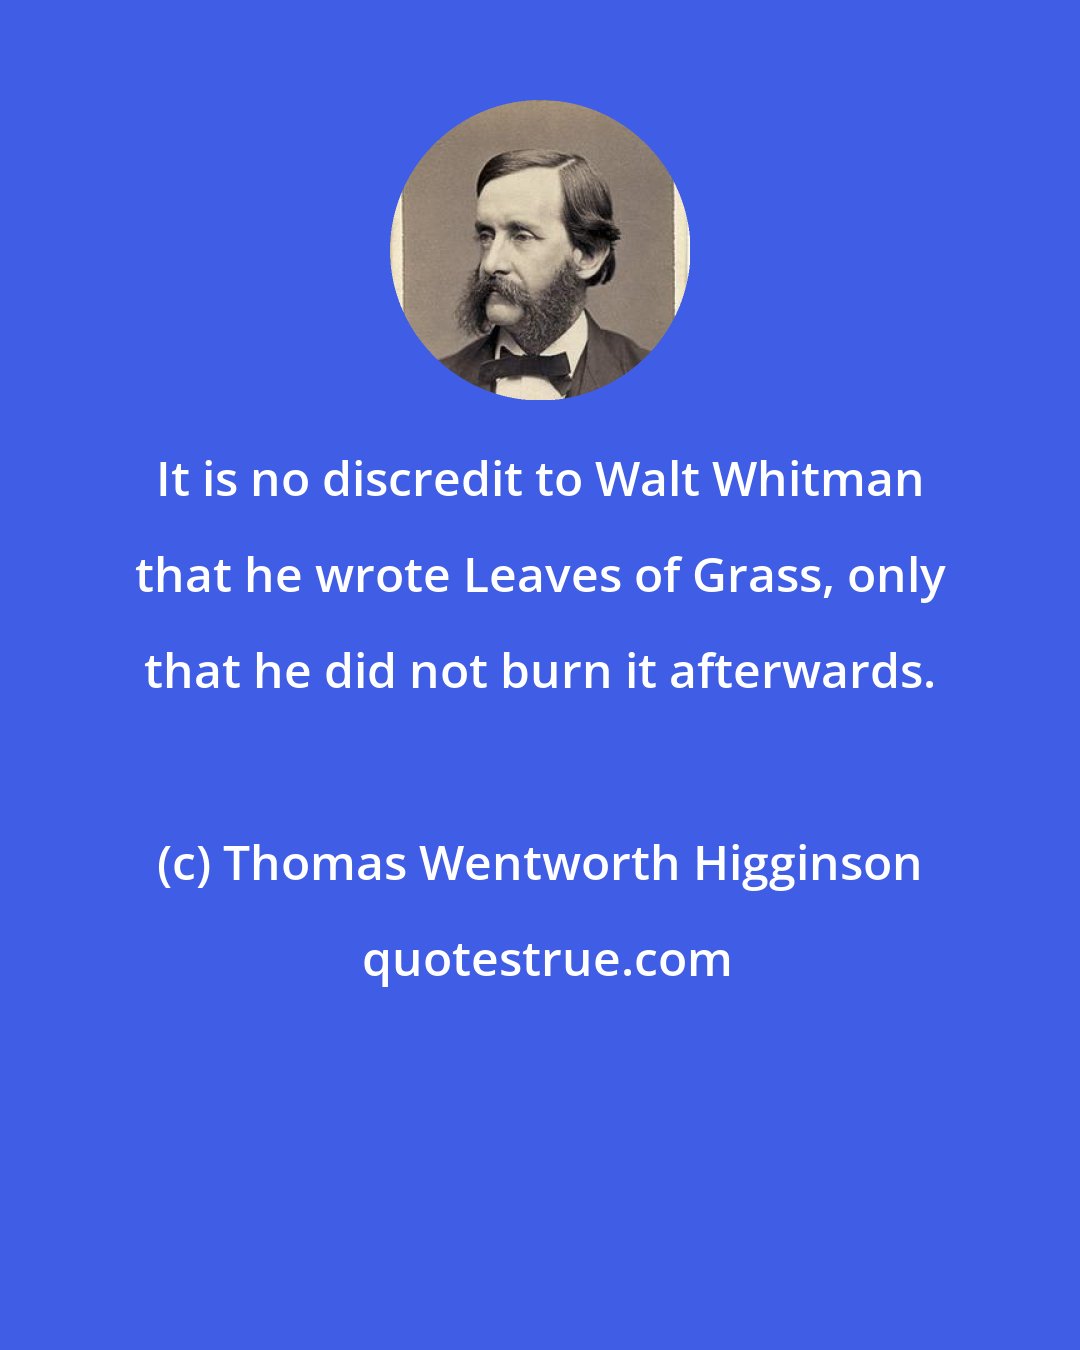 Thomas Wentworth Higginson: It is no discredit to Walt Whitman that he wrote Leaves of Grass, only that he did not burn it afterwards.